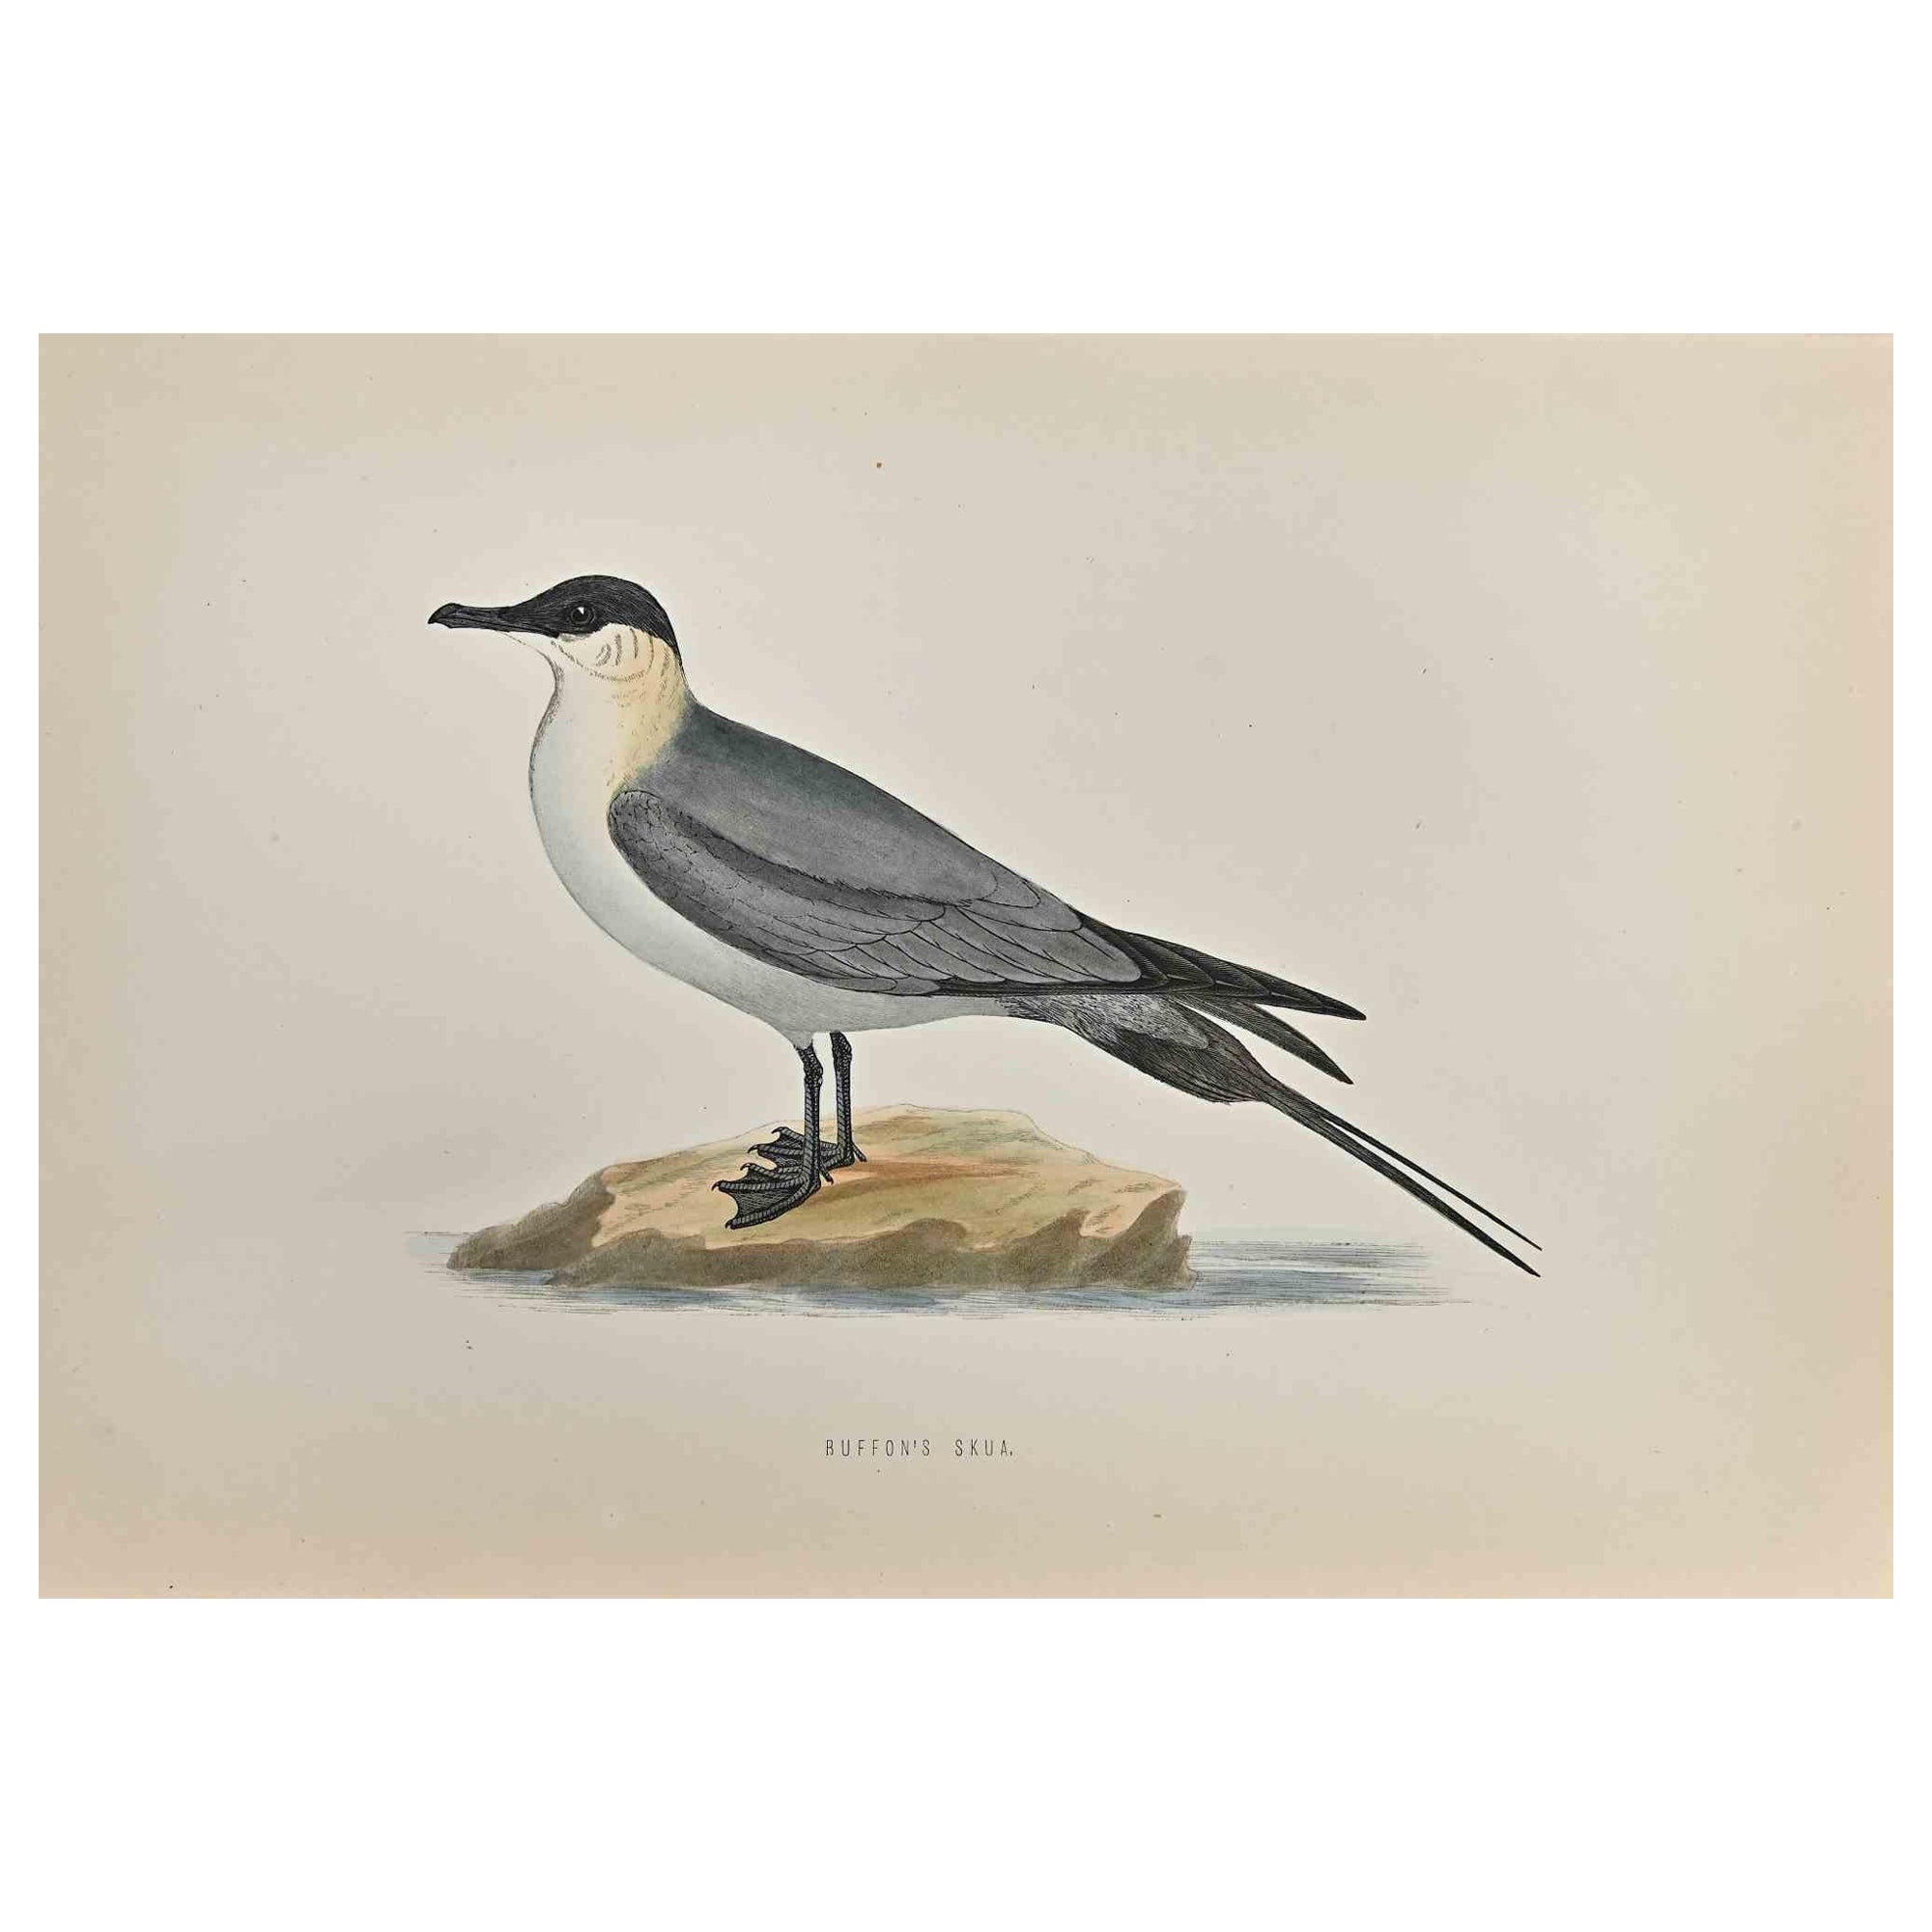 Buffon's Skua is a modern artwork realized in 1870 by the British artist Alexander Francis Lydon (1836-1917) . 

Woodcut print, hand colored, published by London, Bell & Sons, 1870.  Name of the bird printed in plate. This work is part of a print